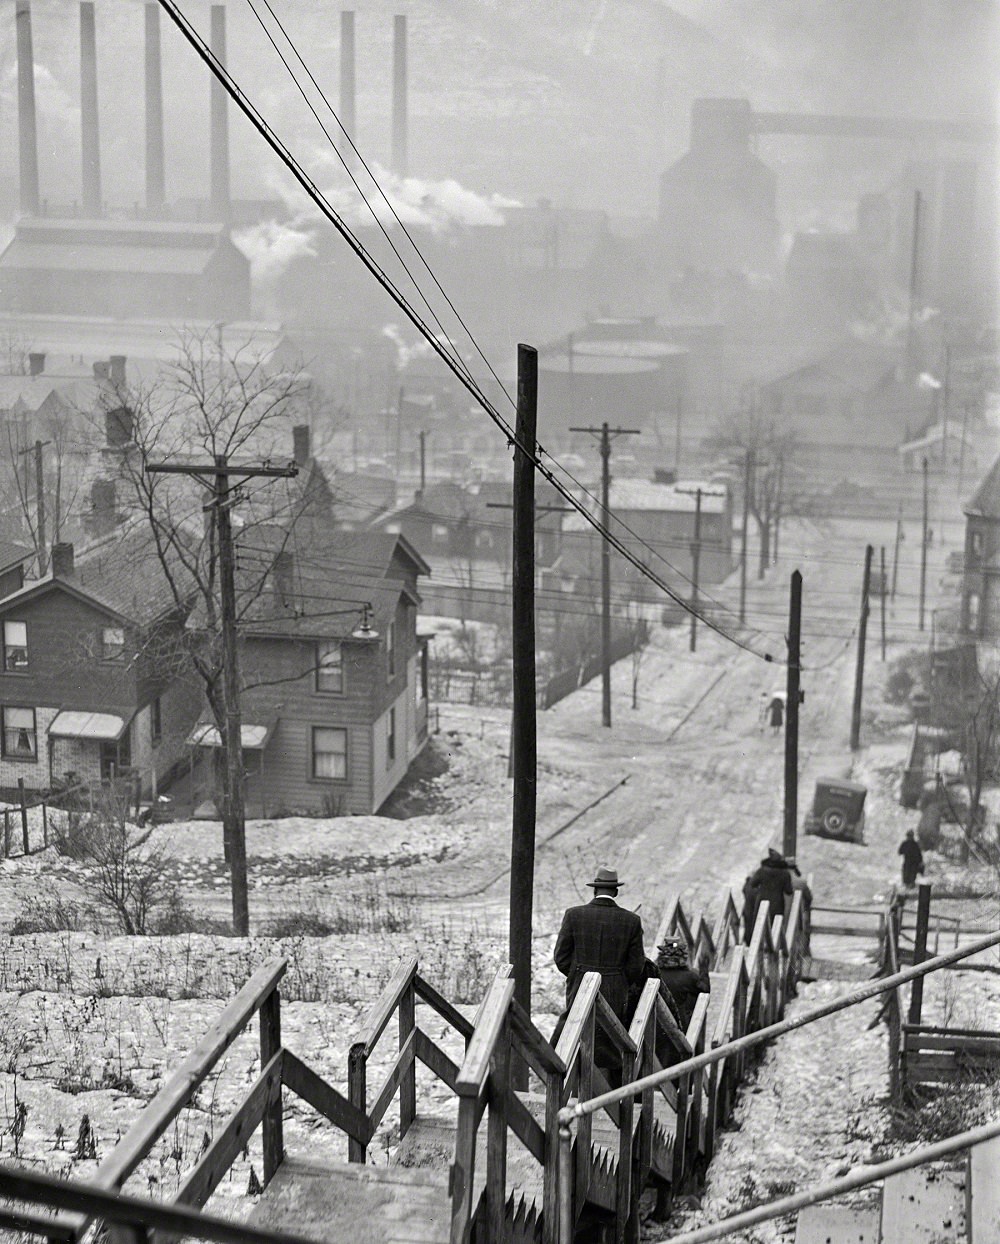 Mill district of Pittsburgh, Pennsylvania, January 1941